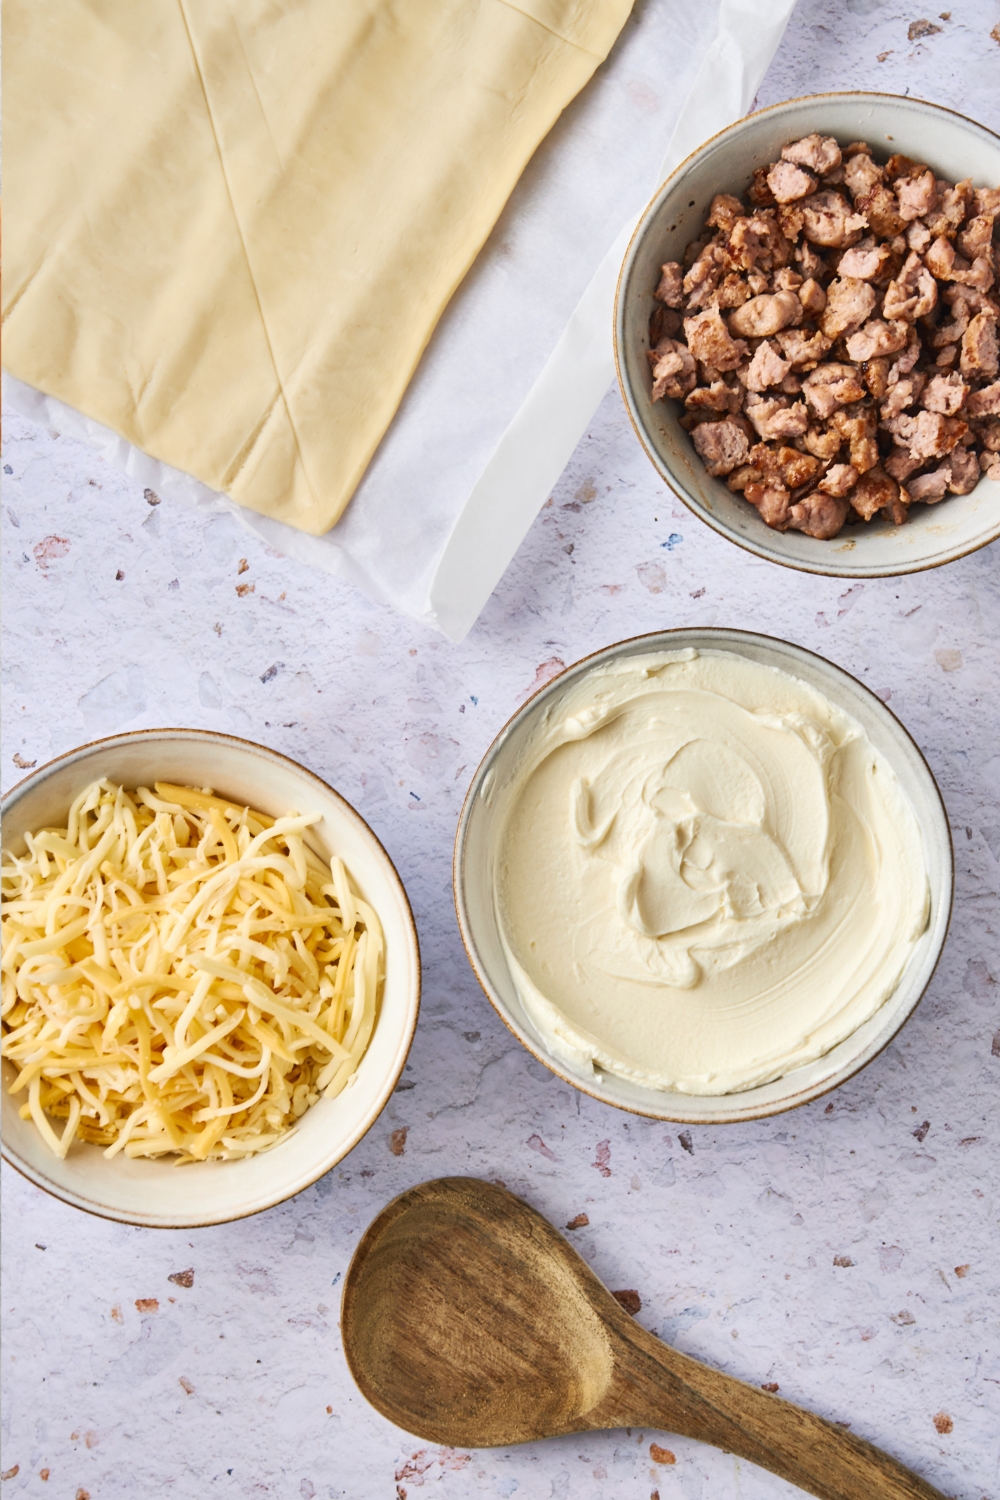 Unrolled crescent dough is on a counter. Bowls with crumbled sausage, cream cheese, shredded cheddar cheese, and a wooden spoon are there as well.